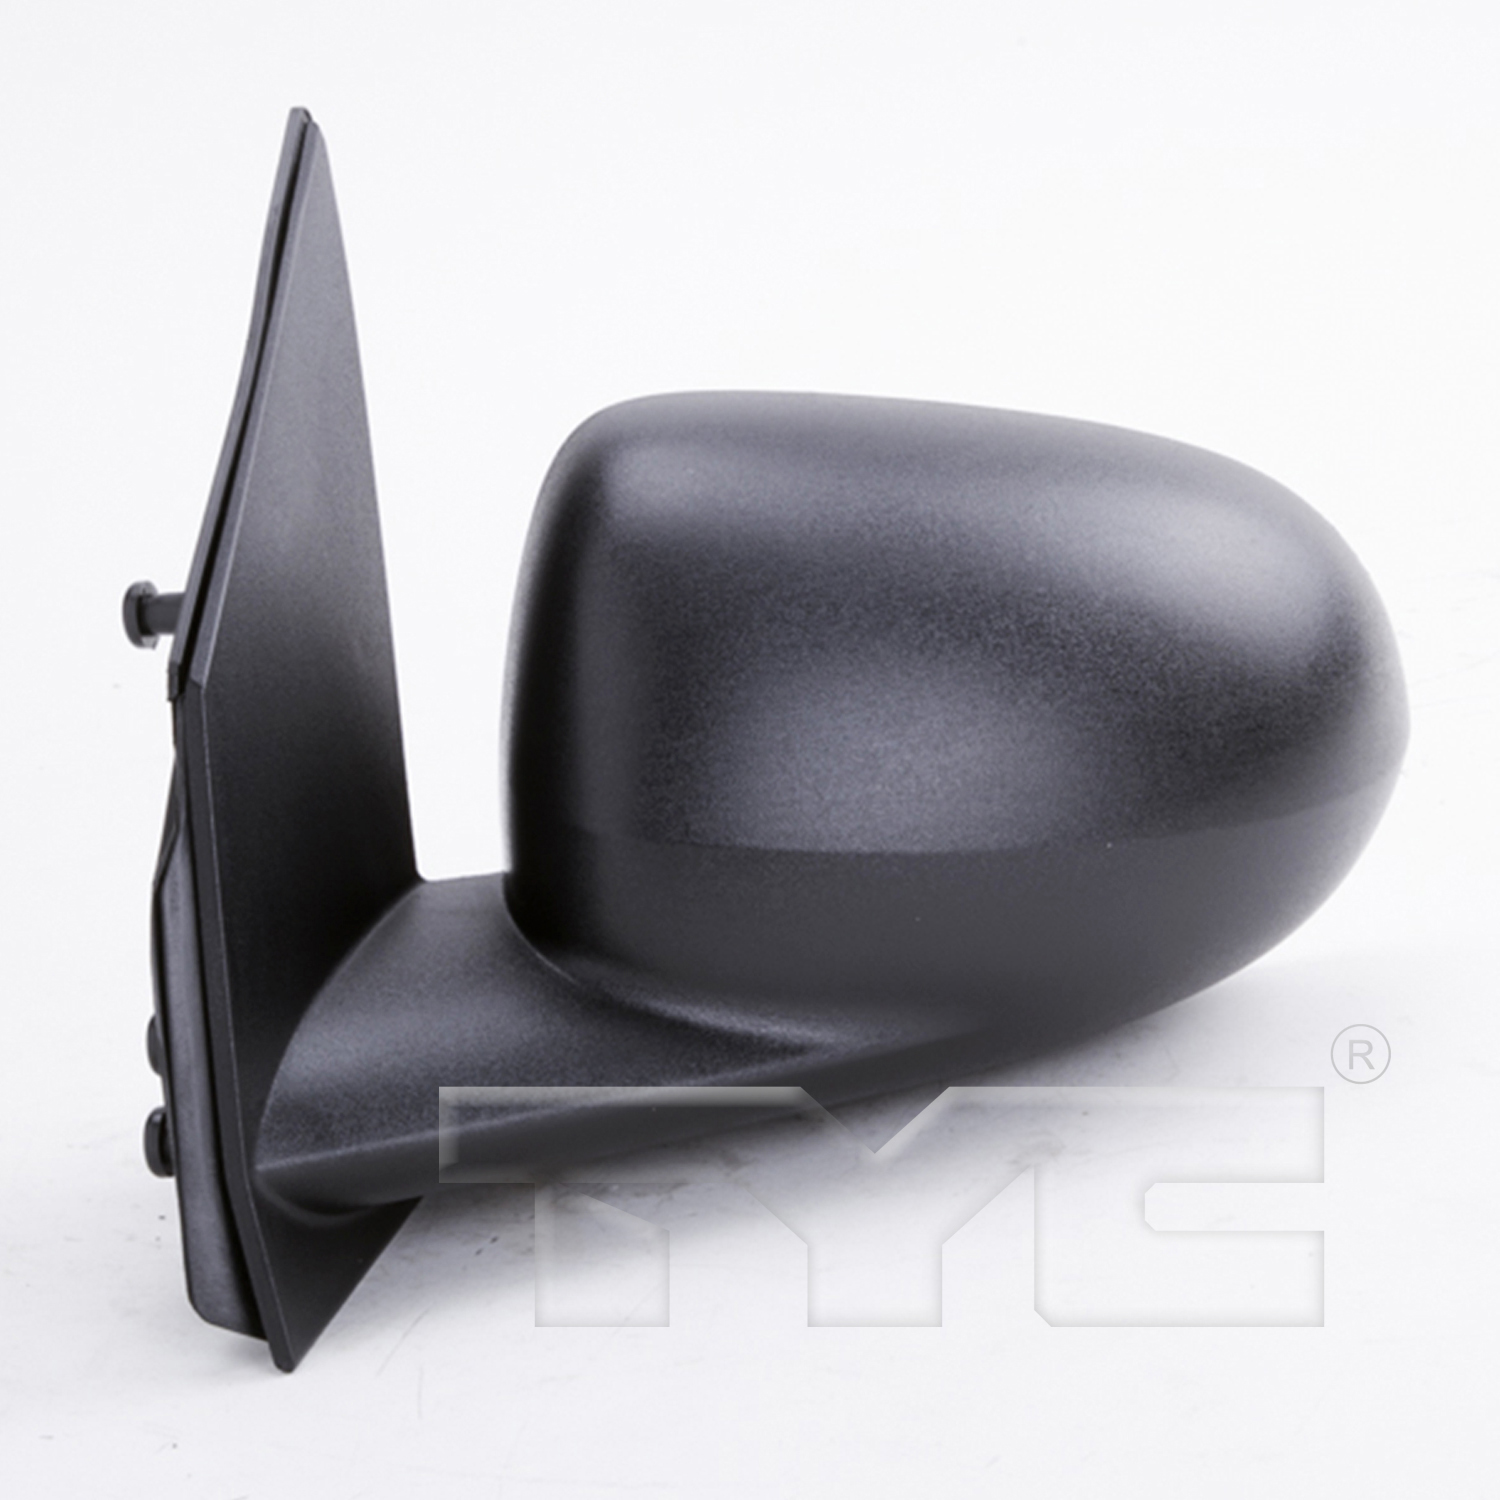 Aftermarket MIRRORS for DODGE - CALIBER, CALIBER,07-12,LT Mirror outside rear view